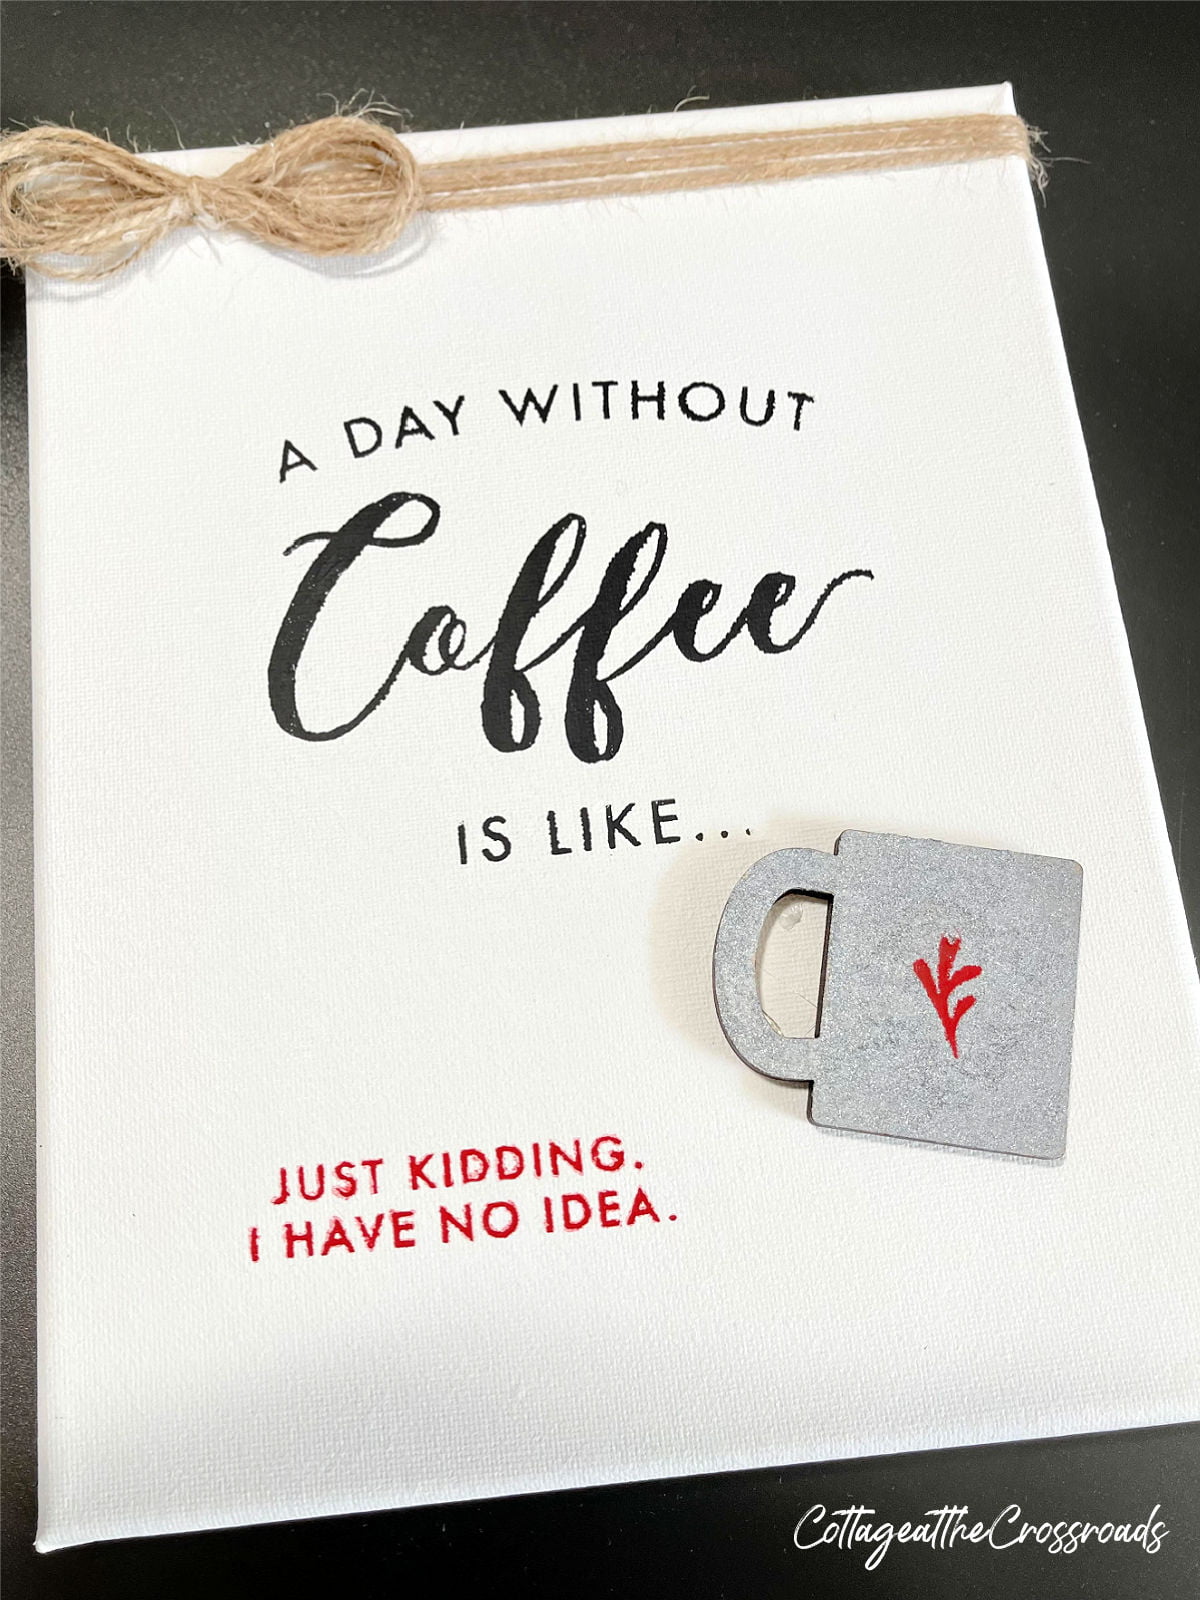 Sign that says a day without coffee is like-just kidding-i have no idea